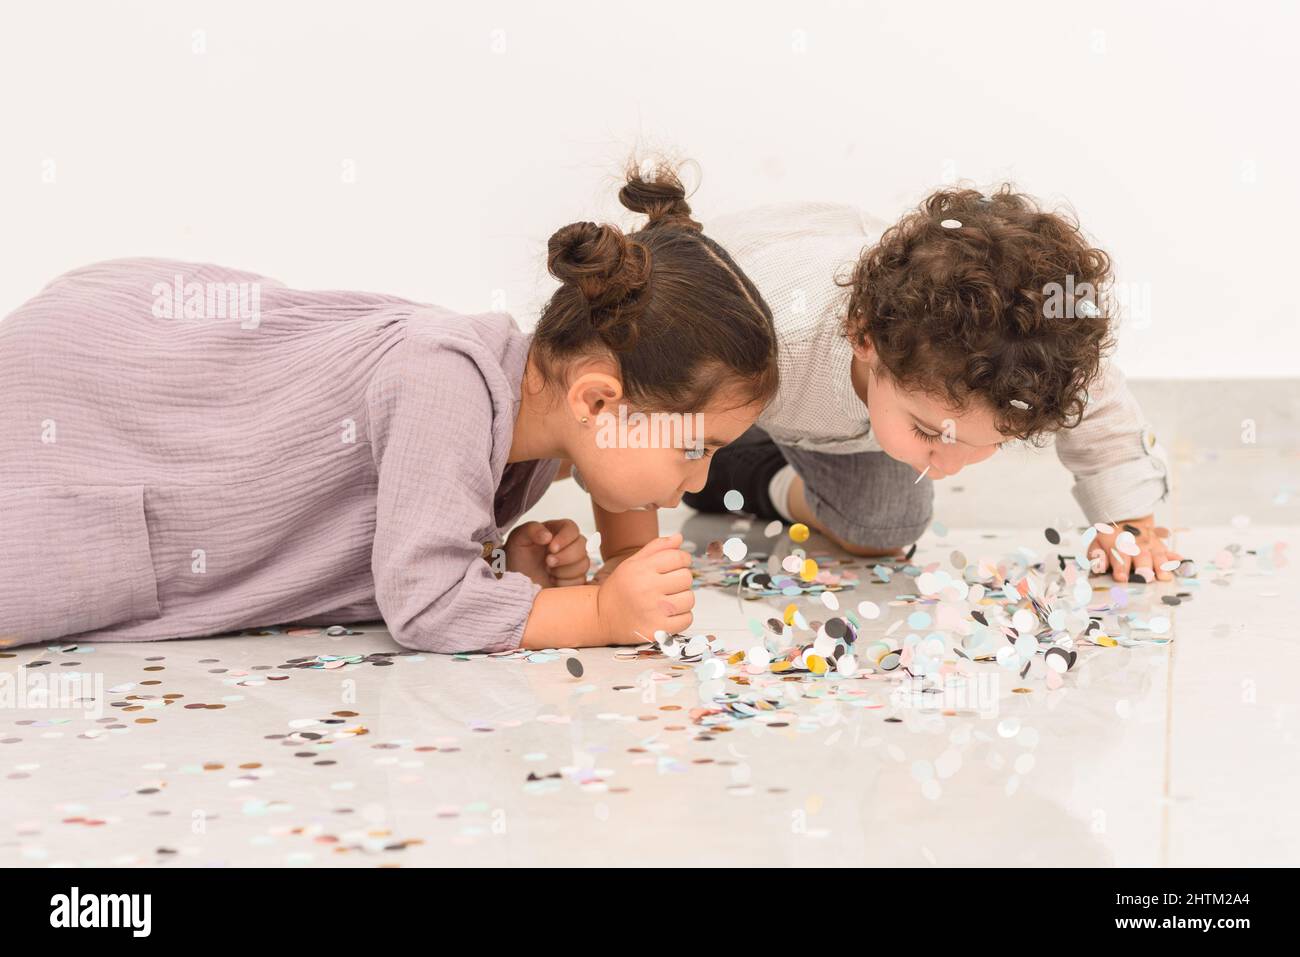 Happy girl and boy having fun together during birthday party with confetti. Cute children enjoying a holiday and throwing confetti. Stock Photo